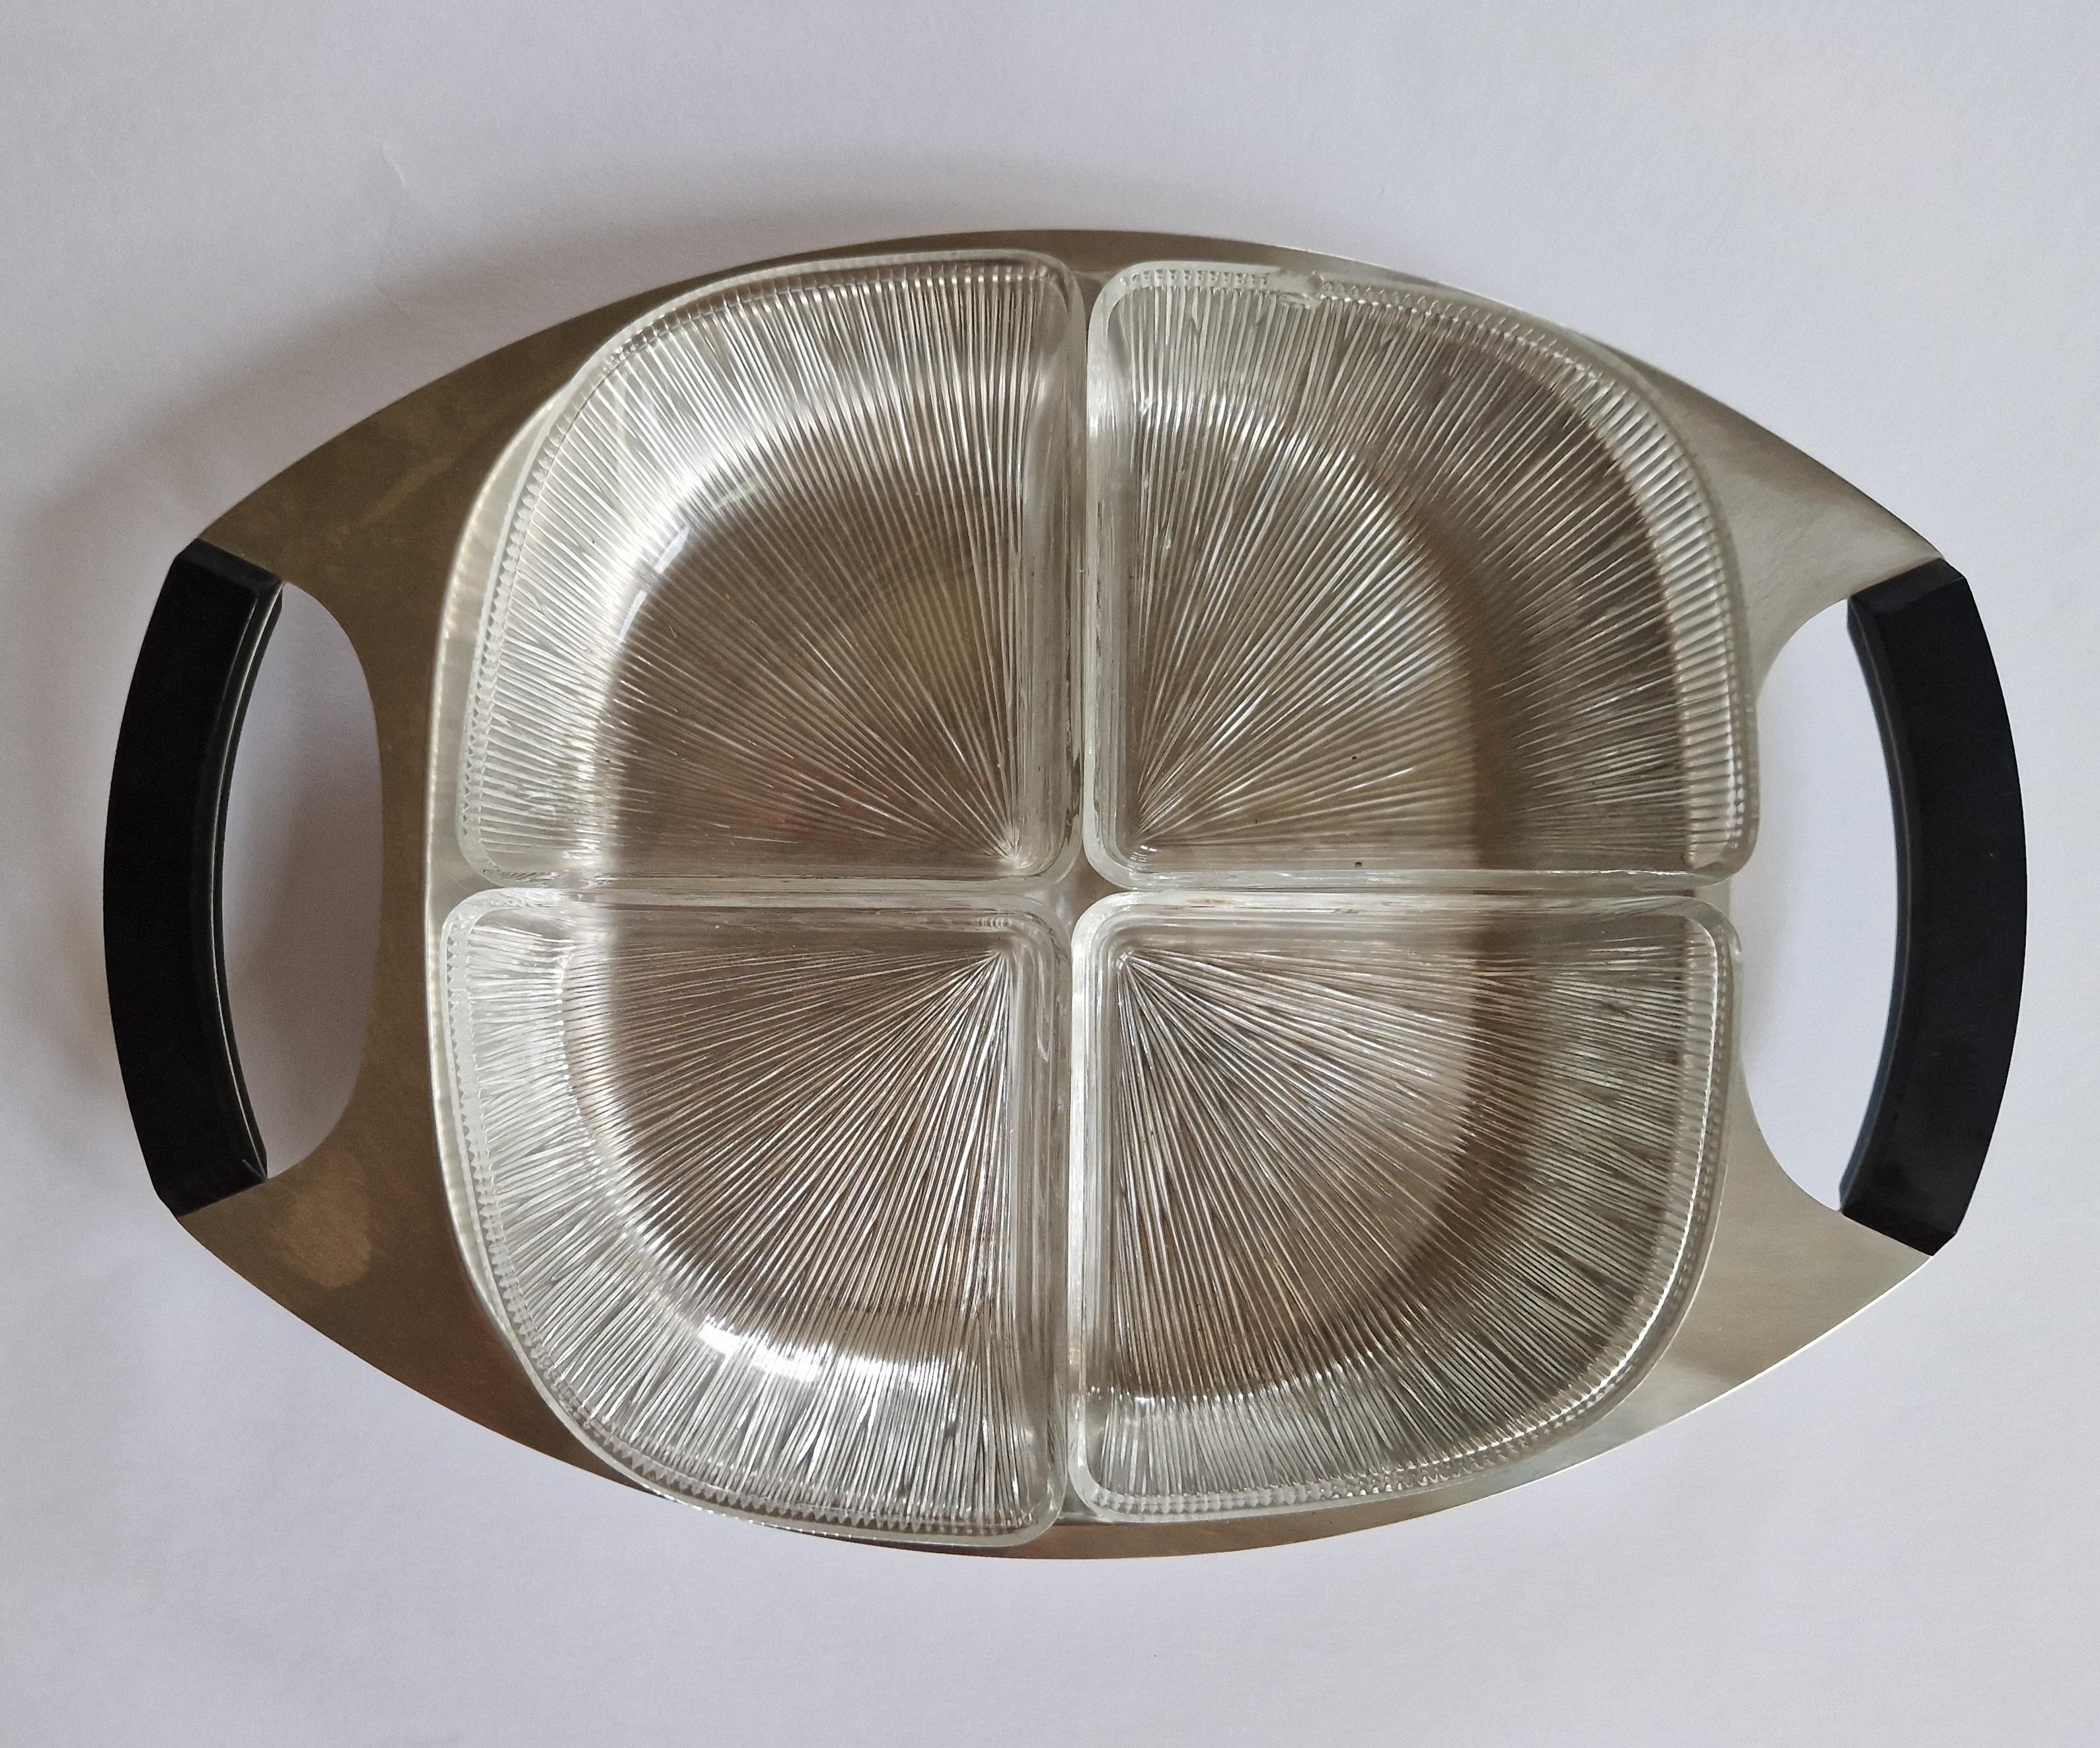 Midcentury Serving Plate Stainless Steel and Glass Cromargan, Germany, 1970s In Good Condition For Sale In Praha, CZ